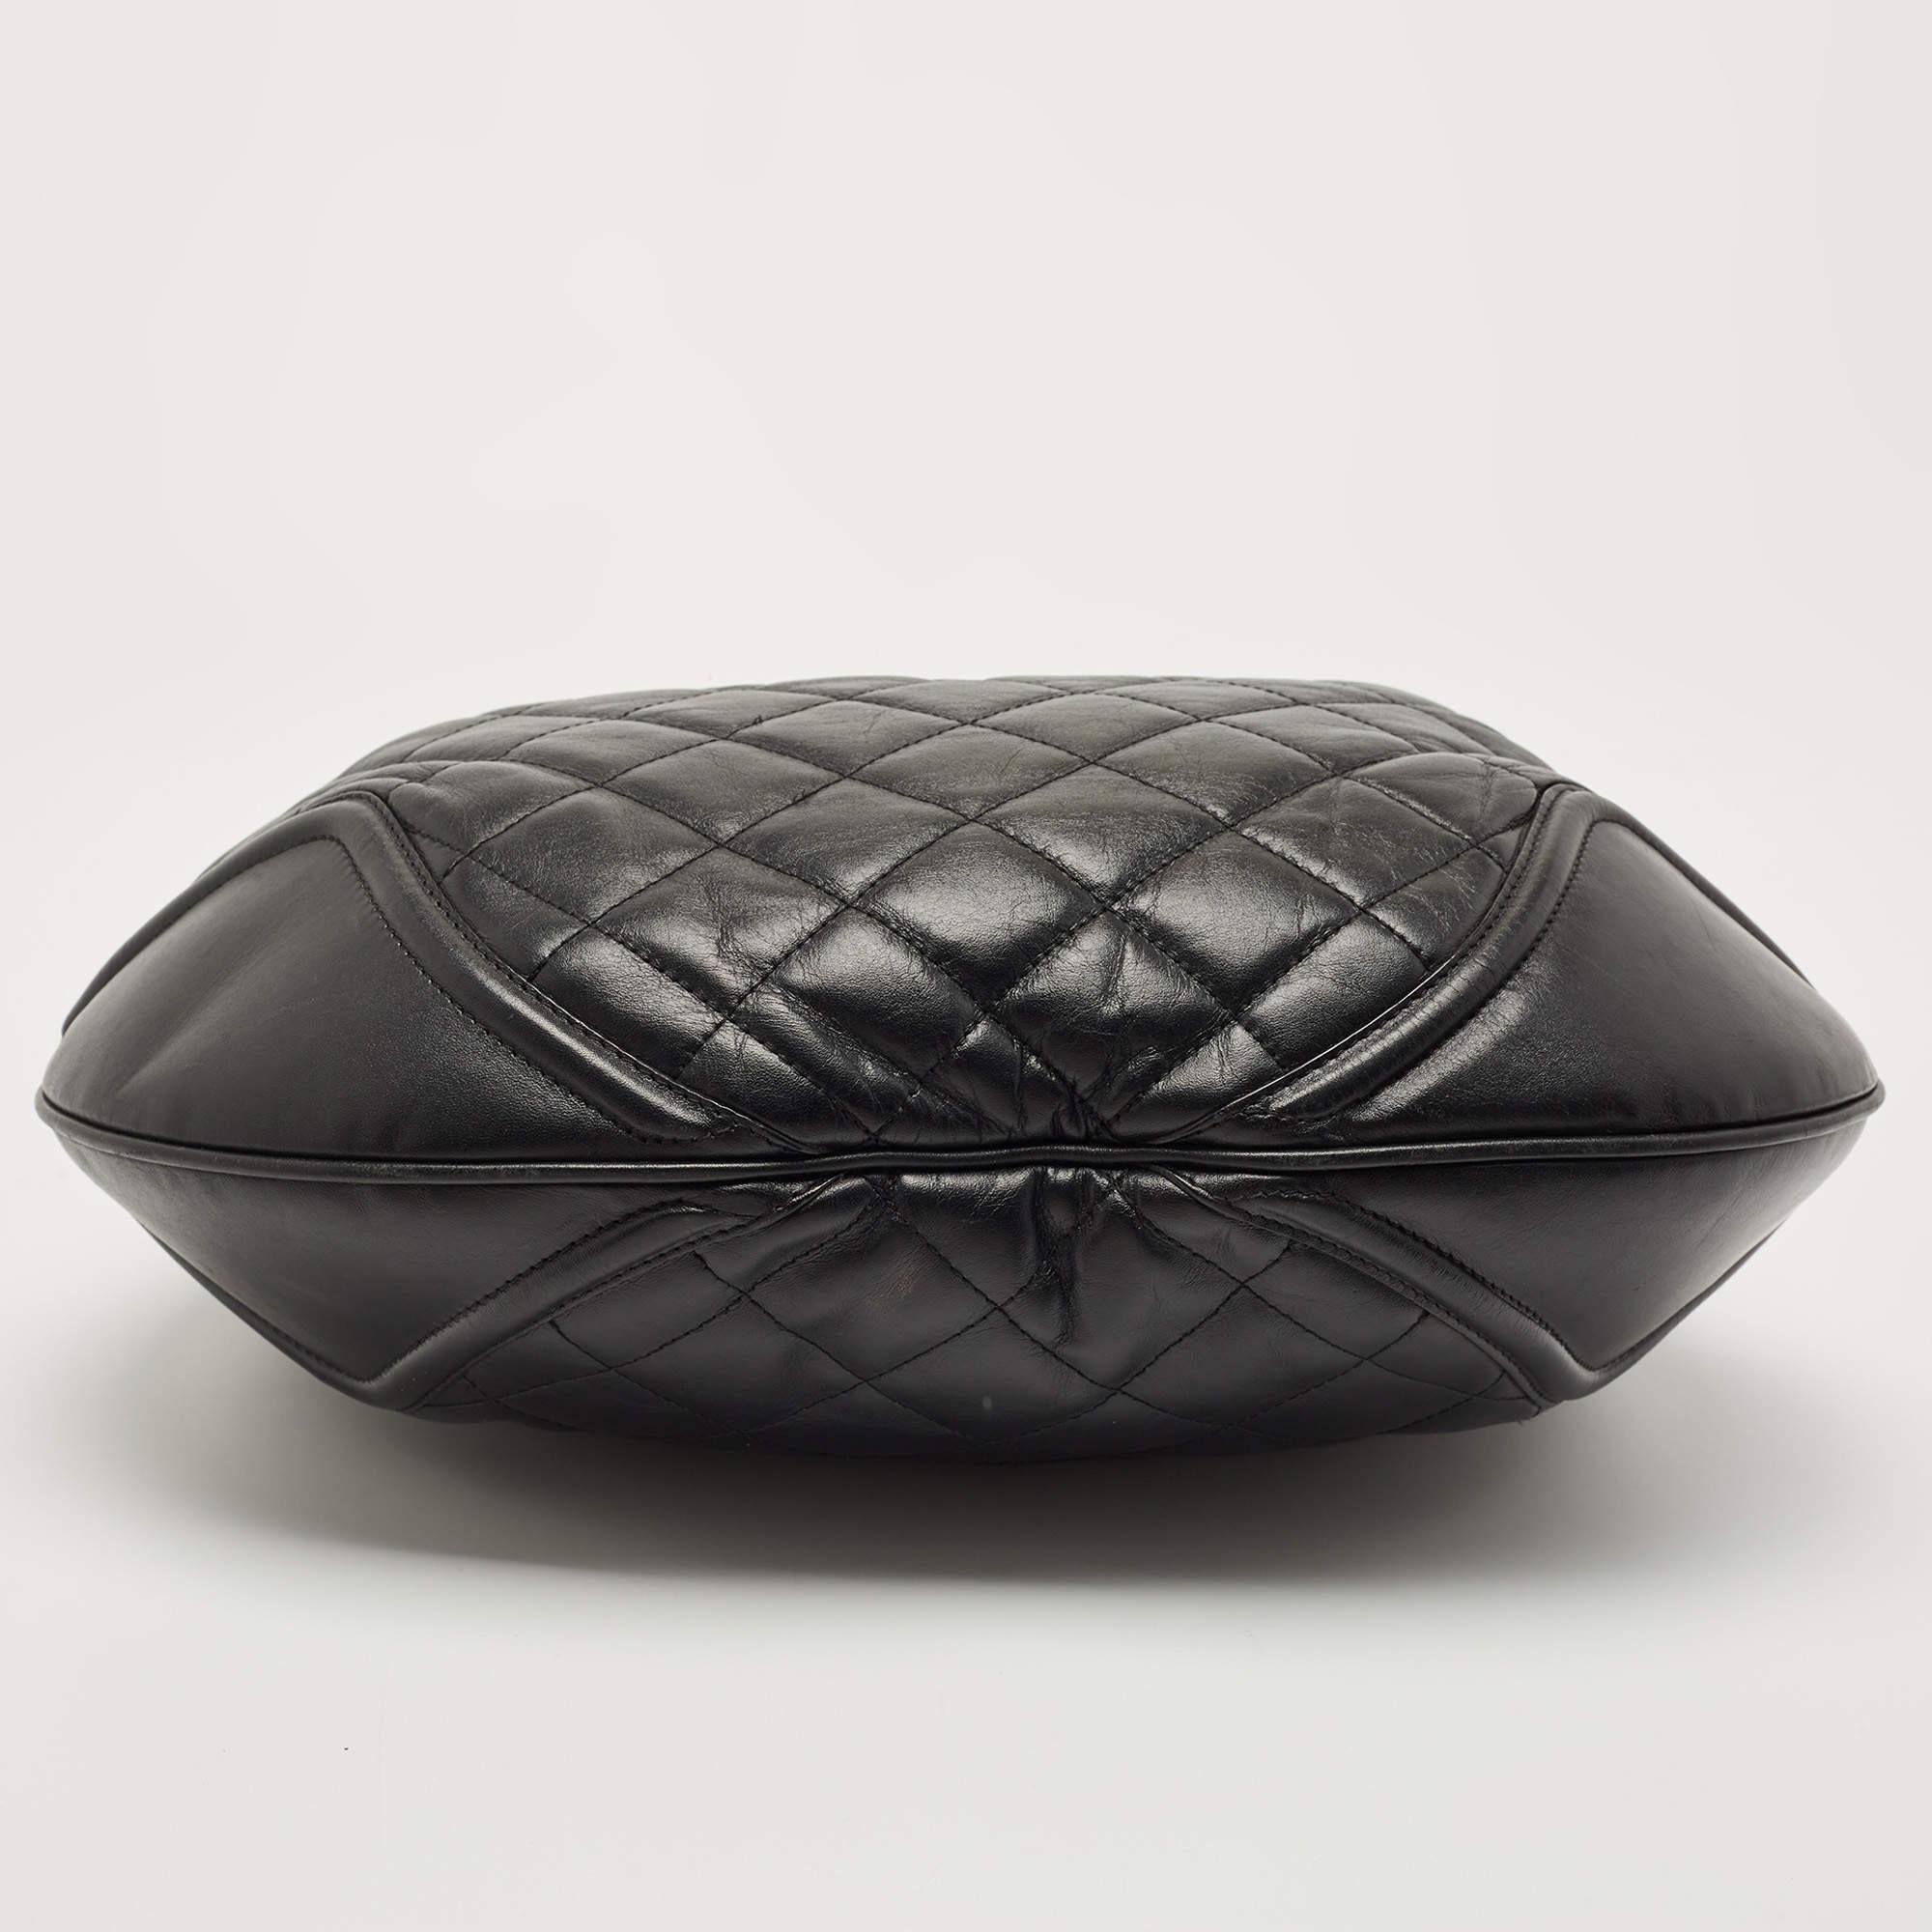 Burberry Black Quilted Leather Hoxton Hobo In Good Condition For Sale In Dubai, Al Qouz 2